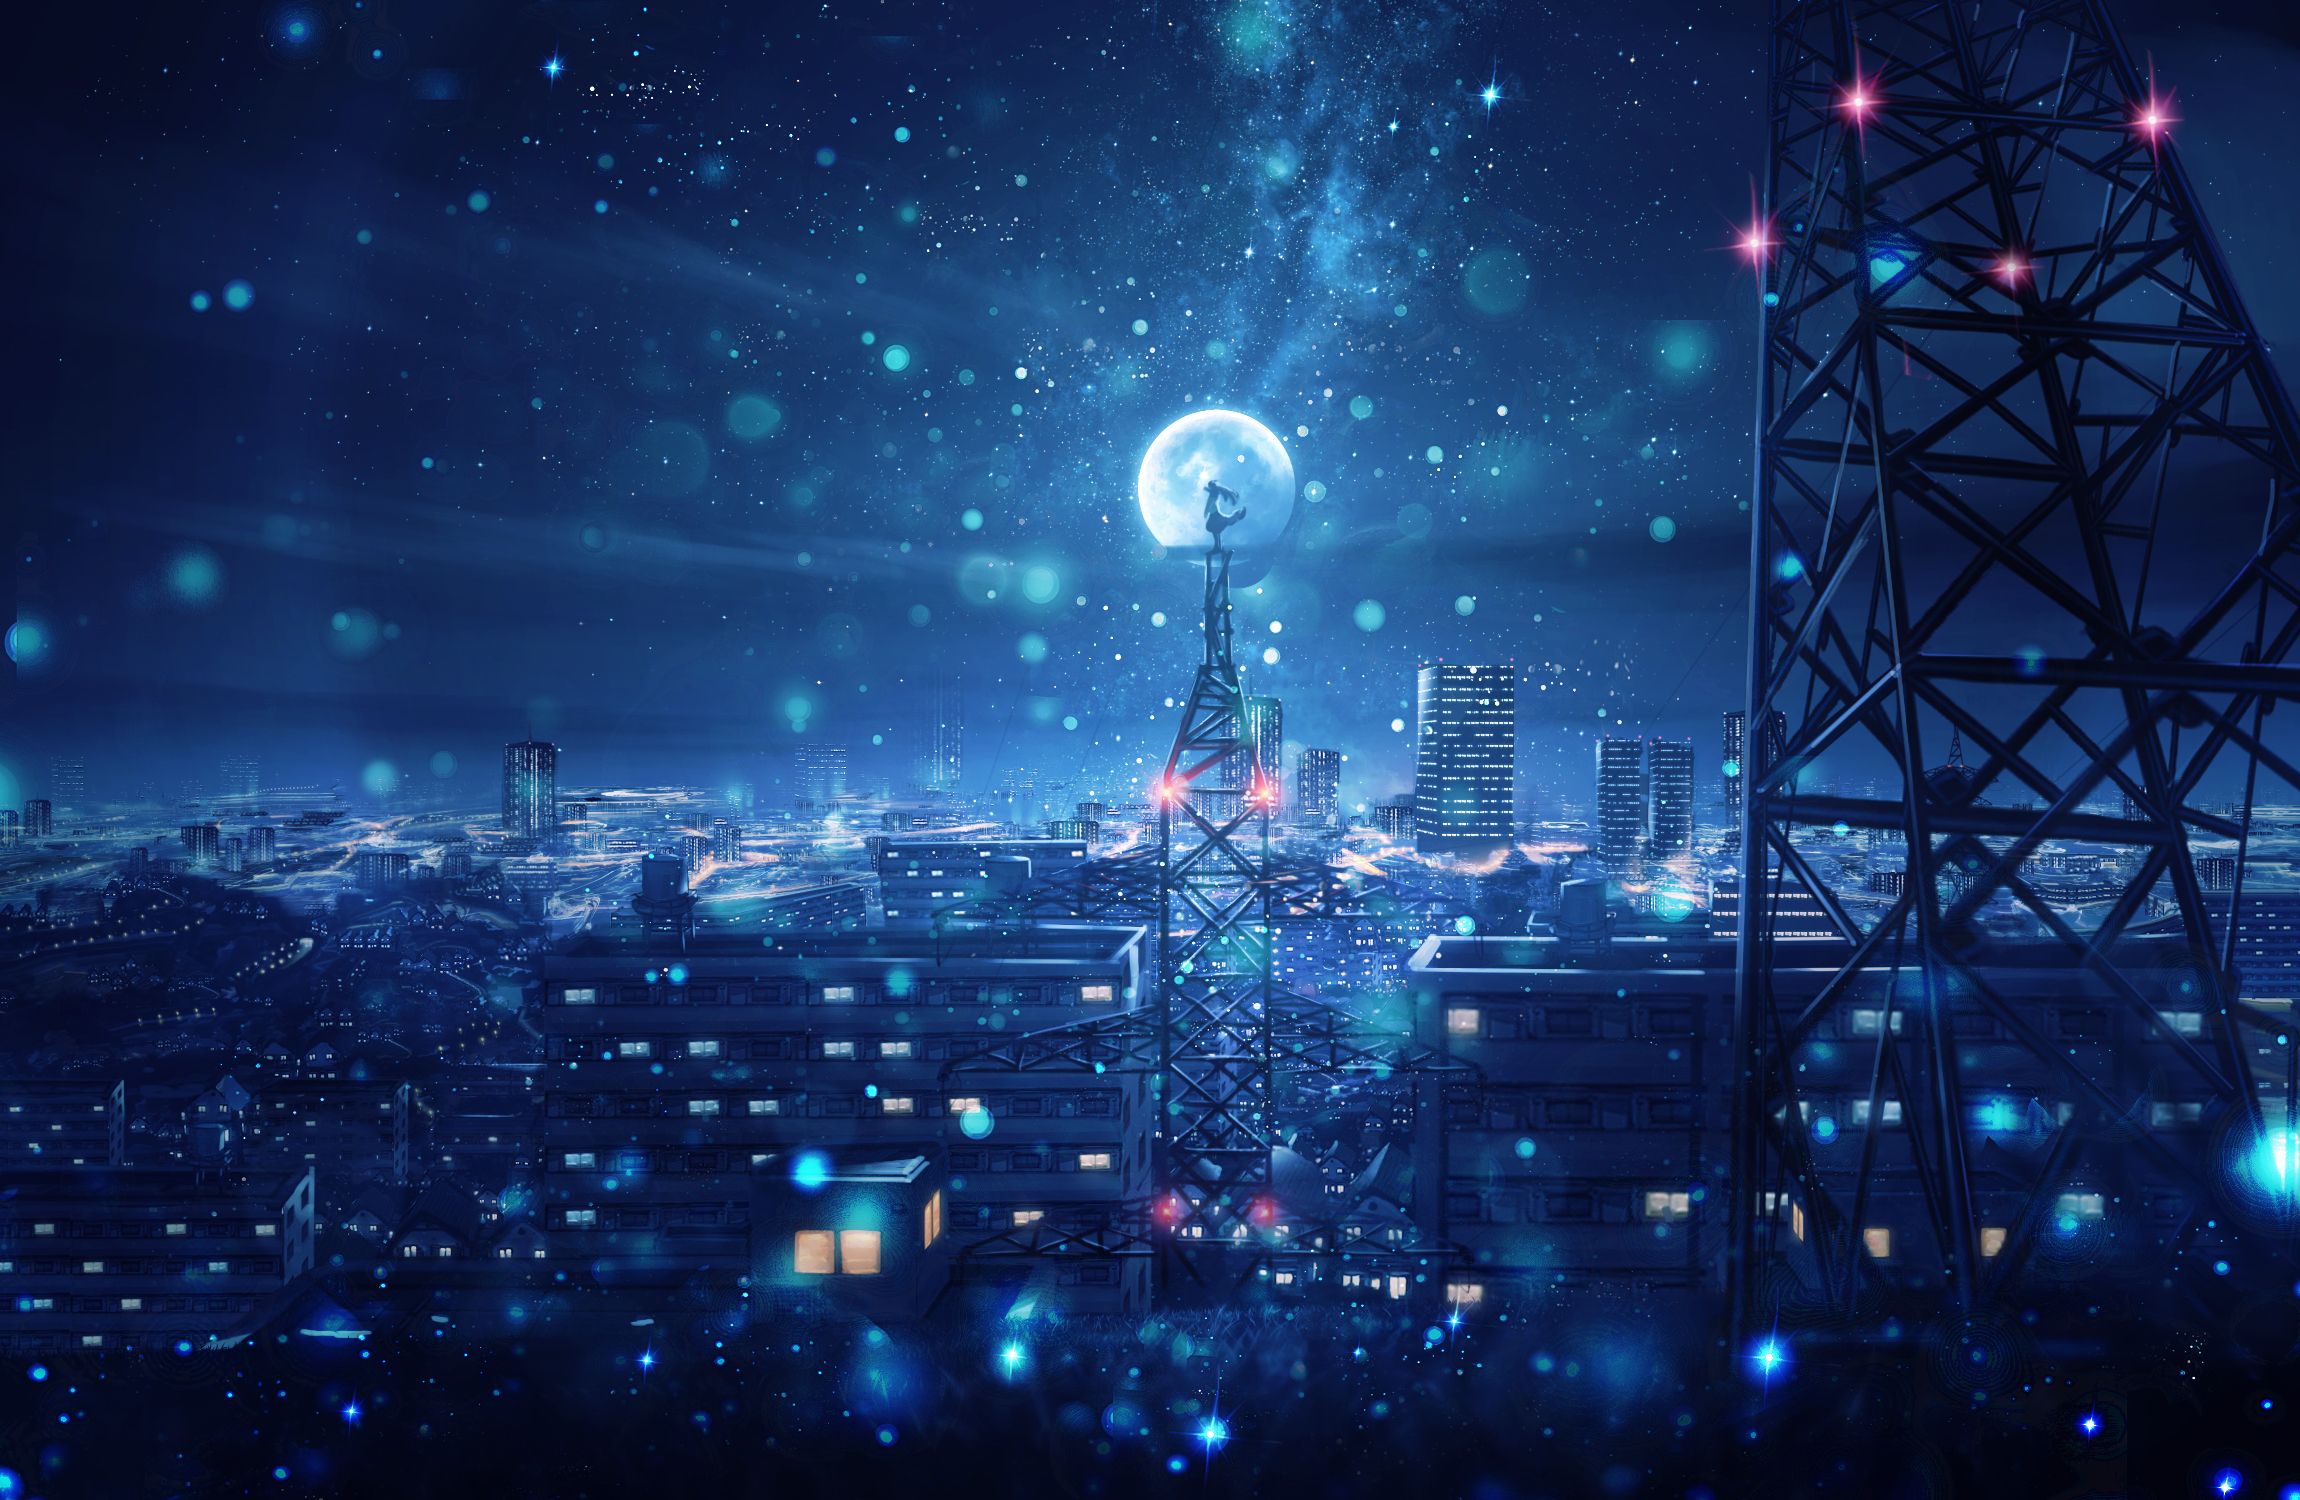 A city at night with a tower and a full moon - Anime city